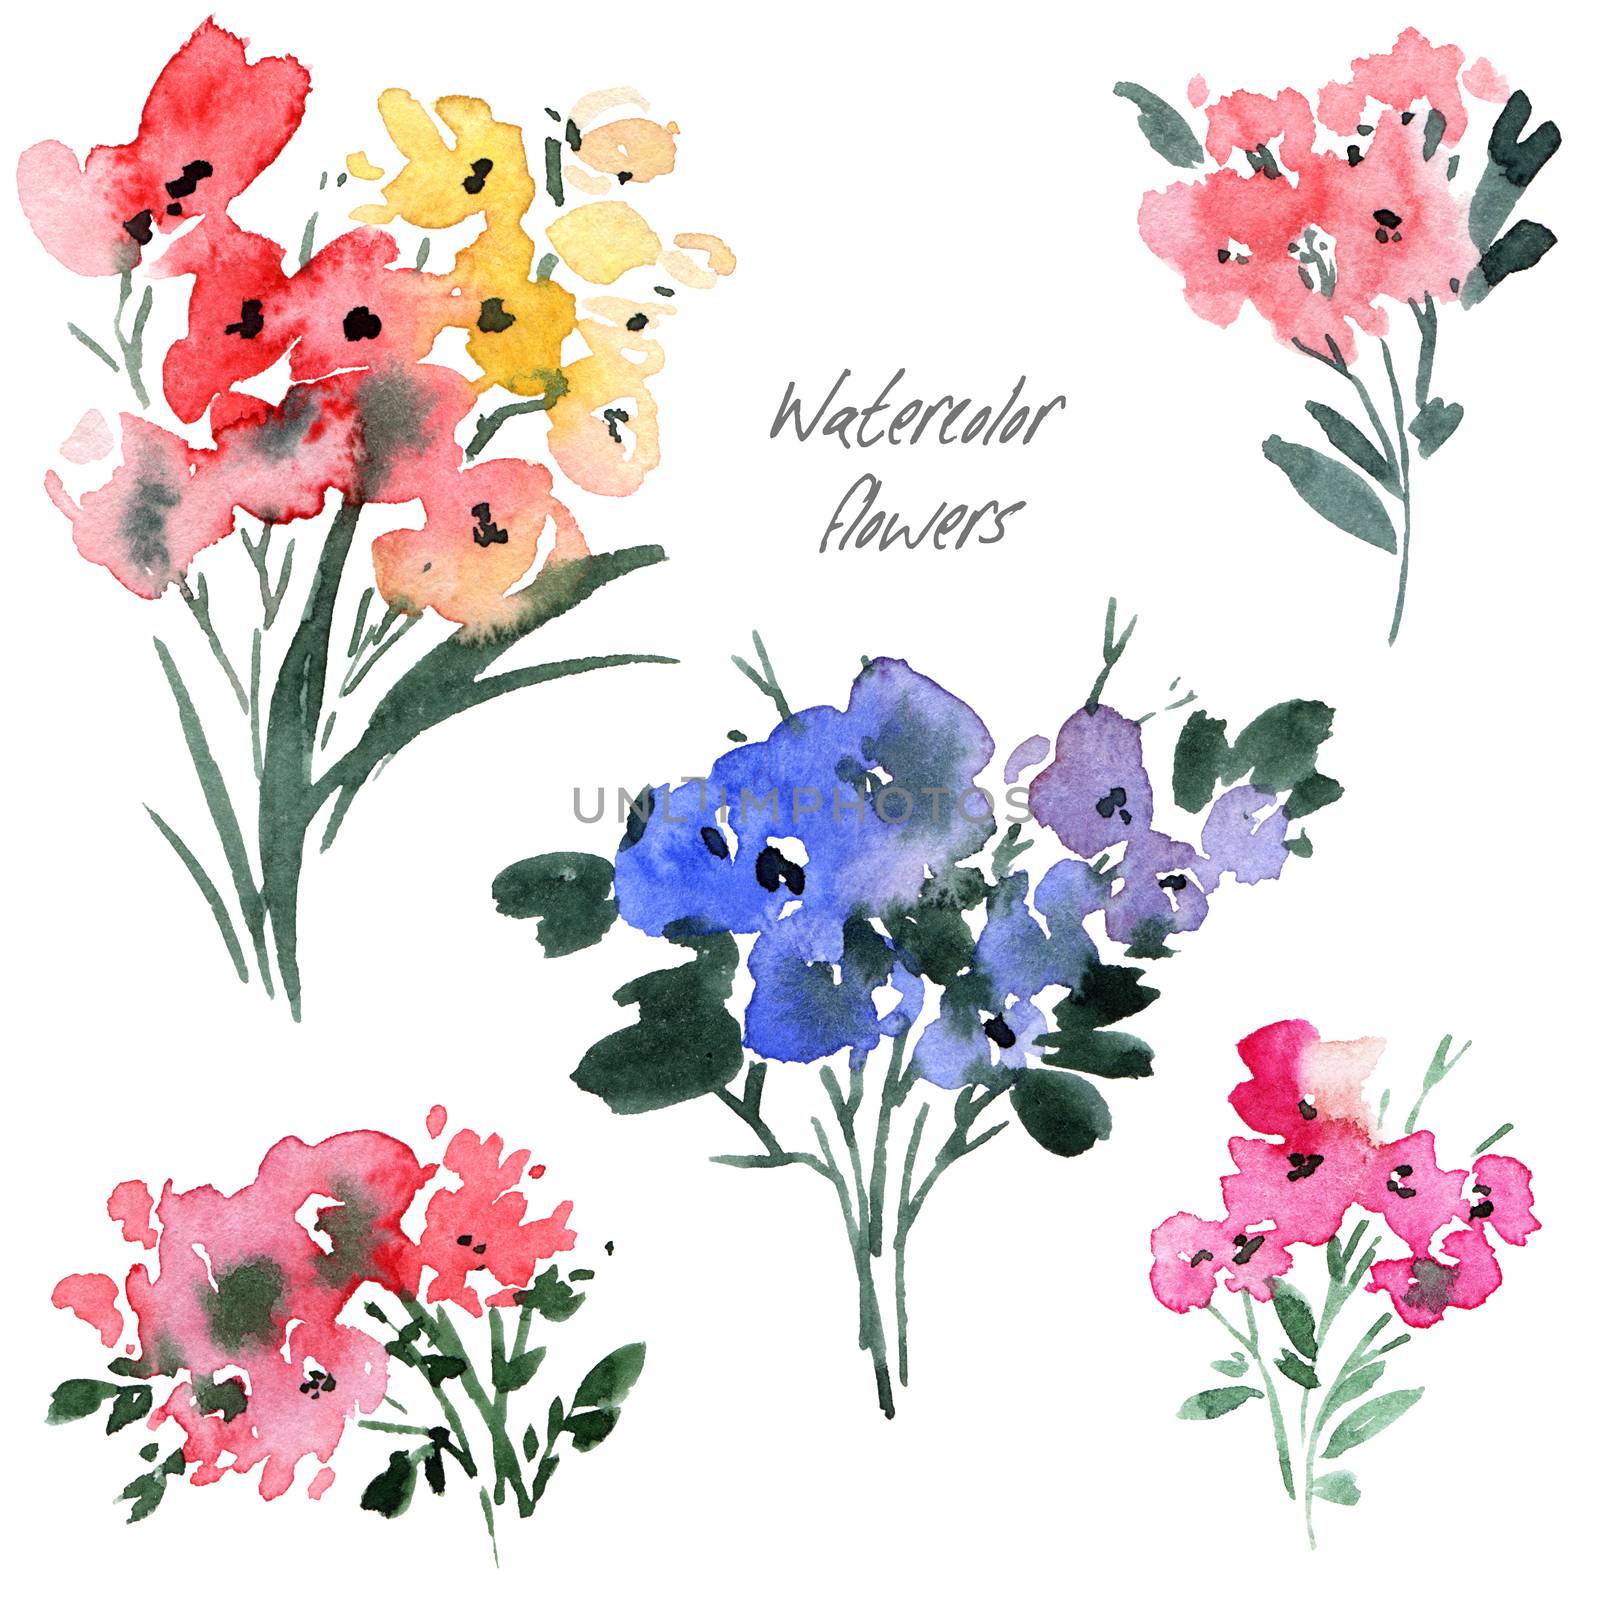 Watercolor floral arrangments with flowers, leaves and twigs. Artistic illustration.